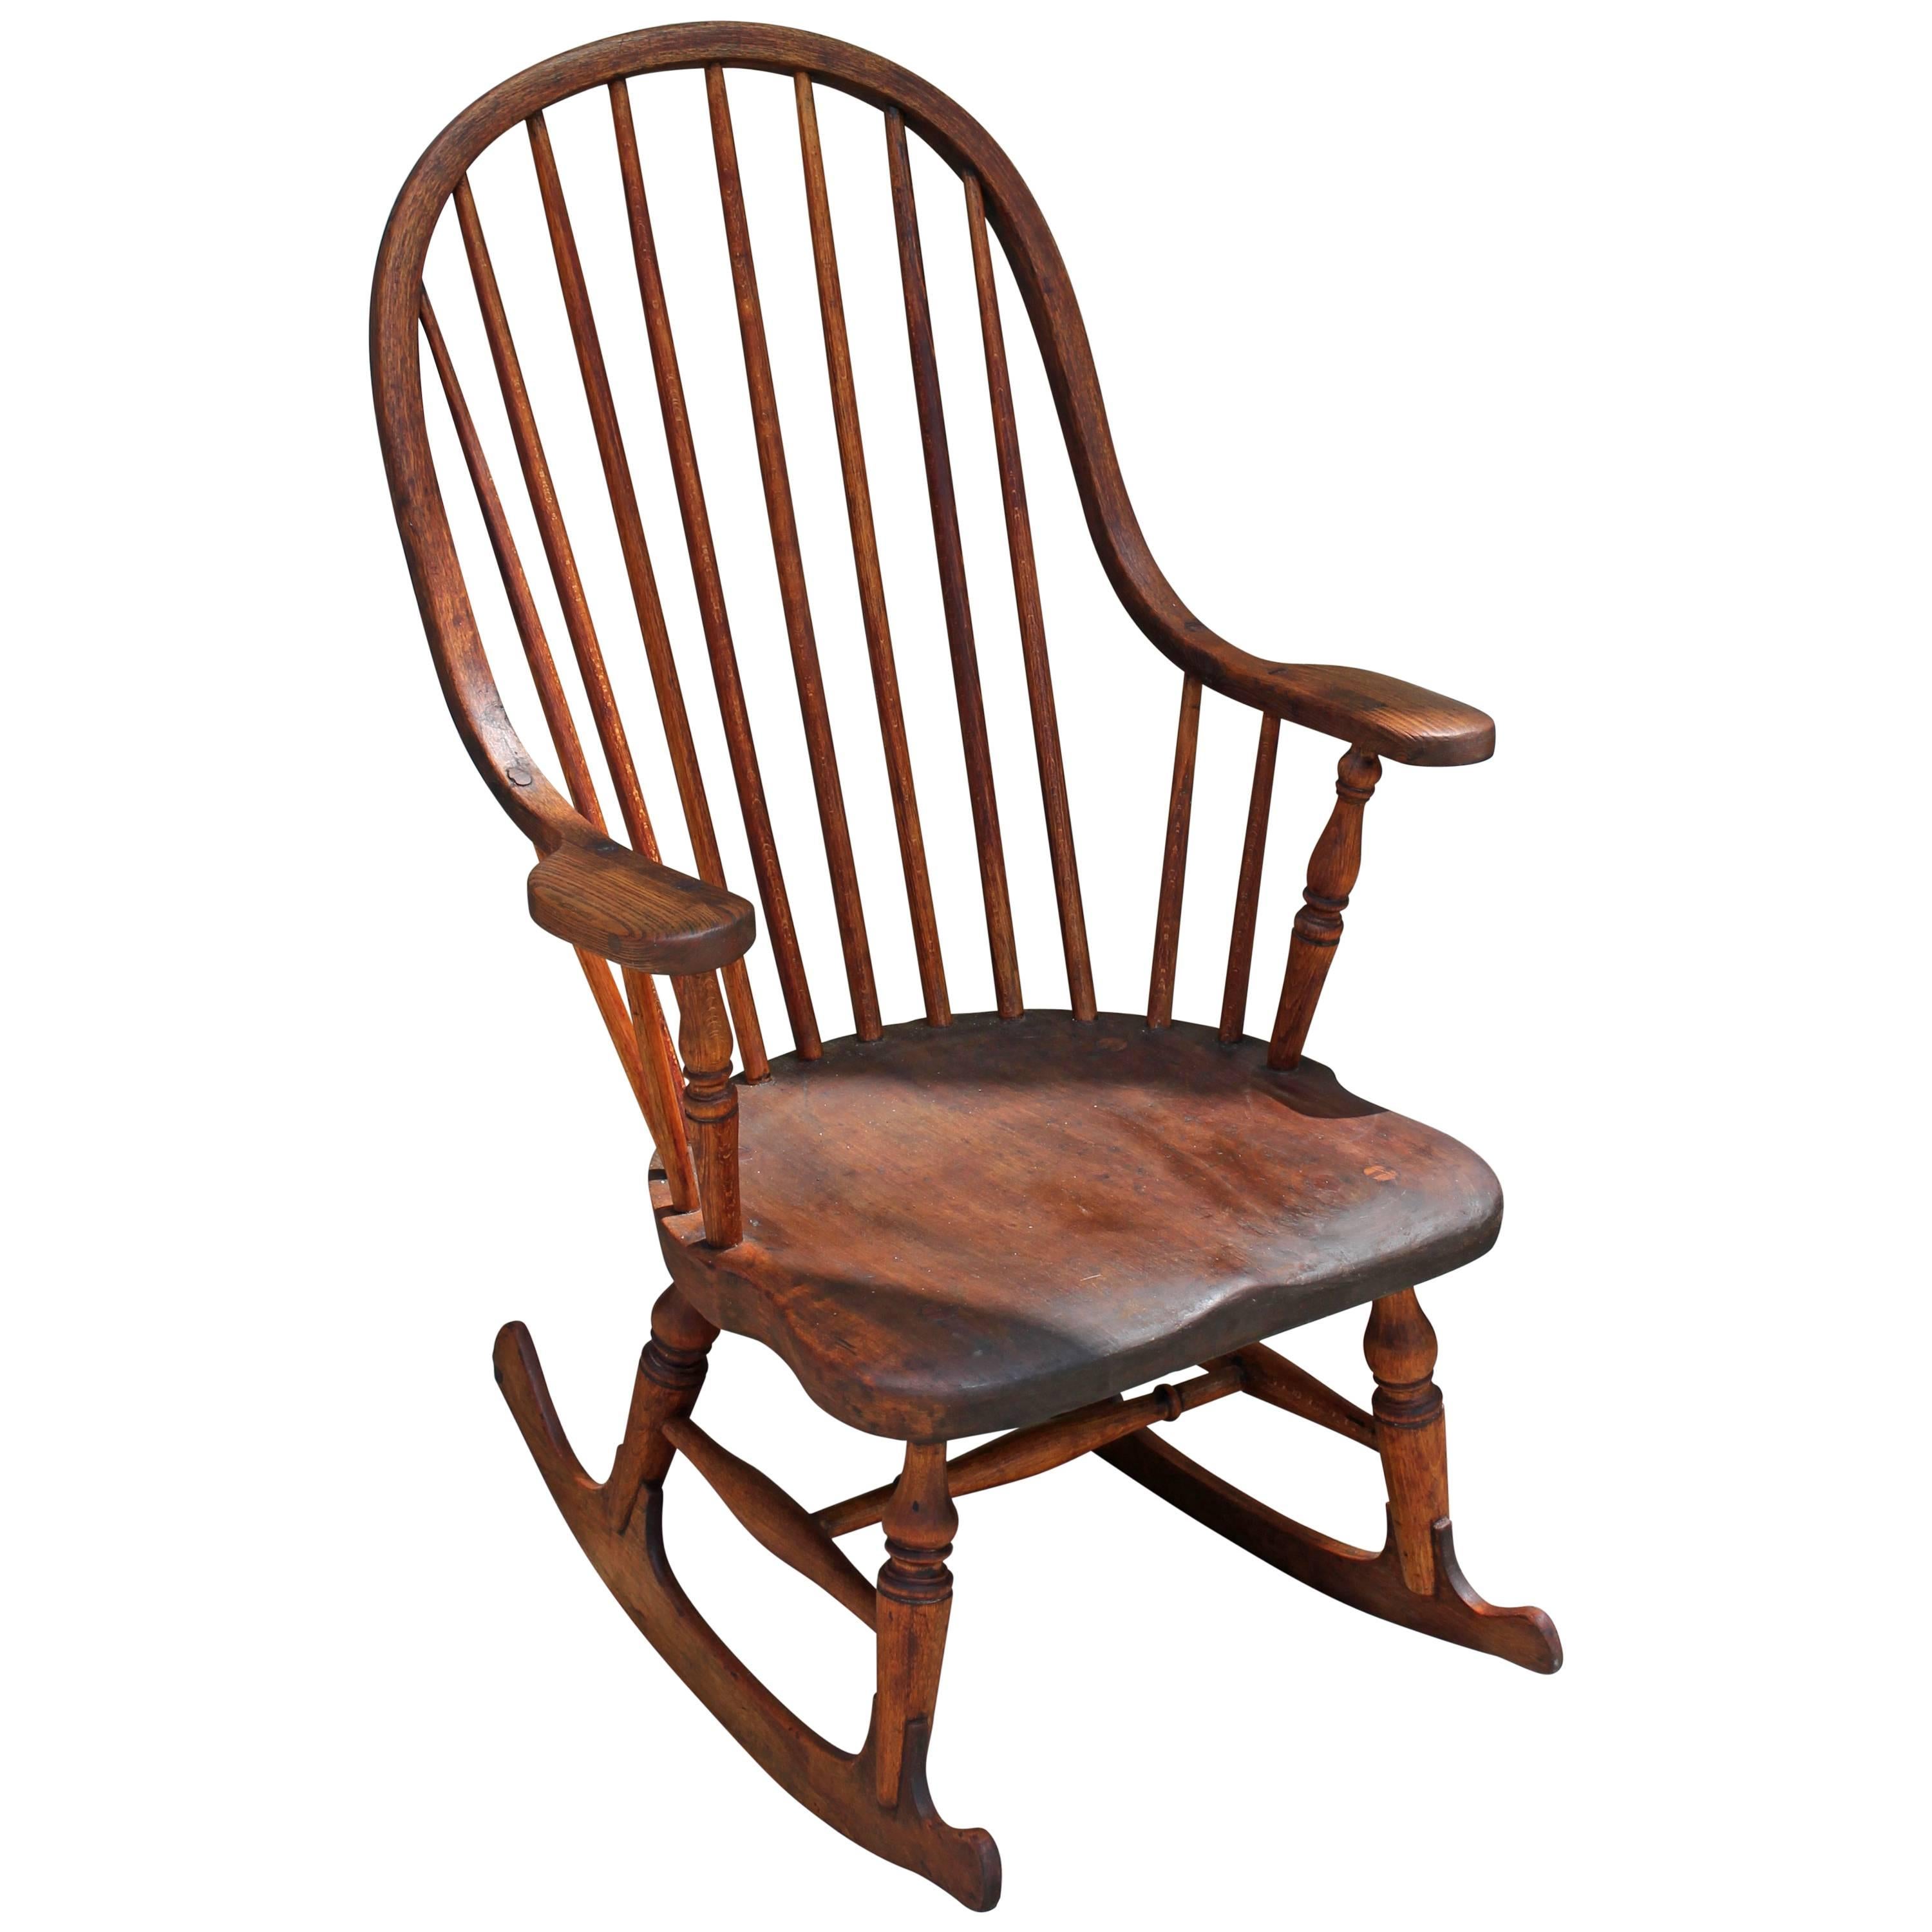 Early 19th Century New England Windsor Rocking Chair